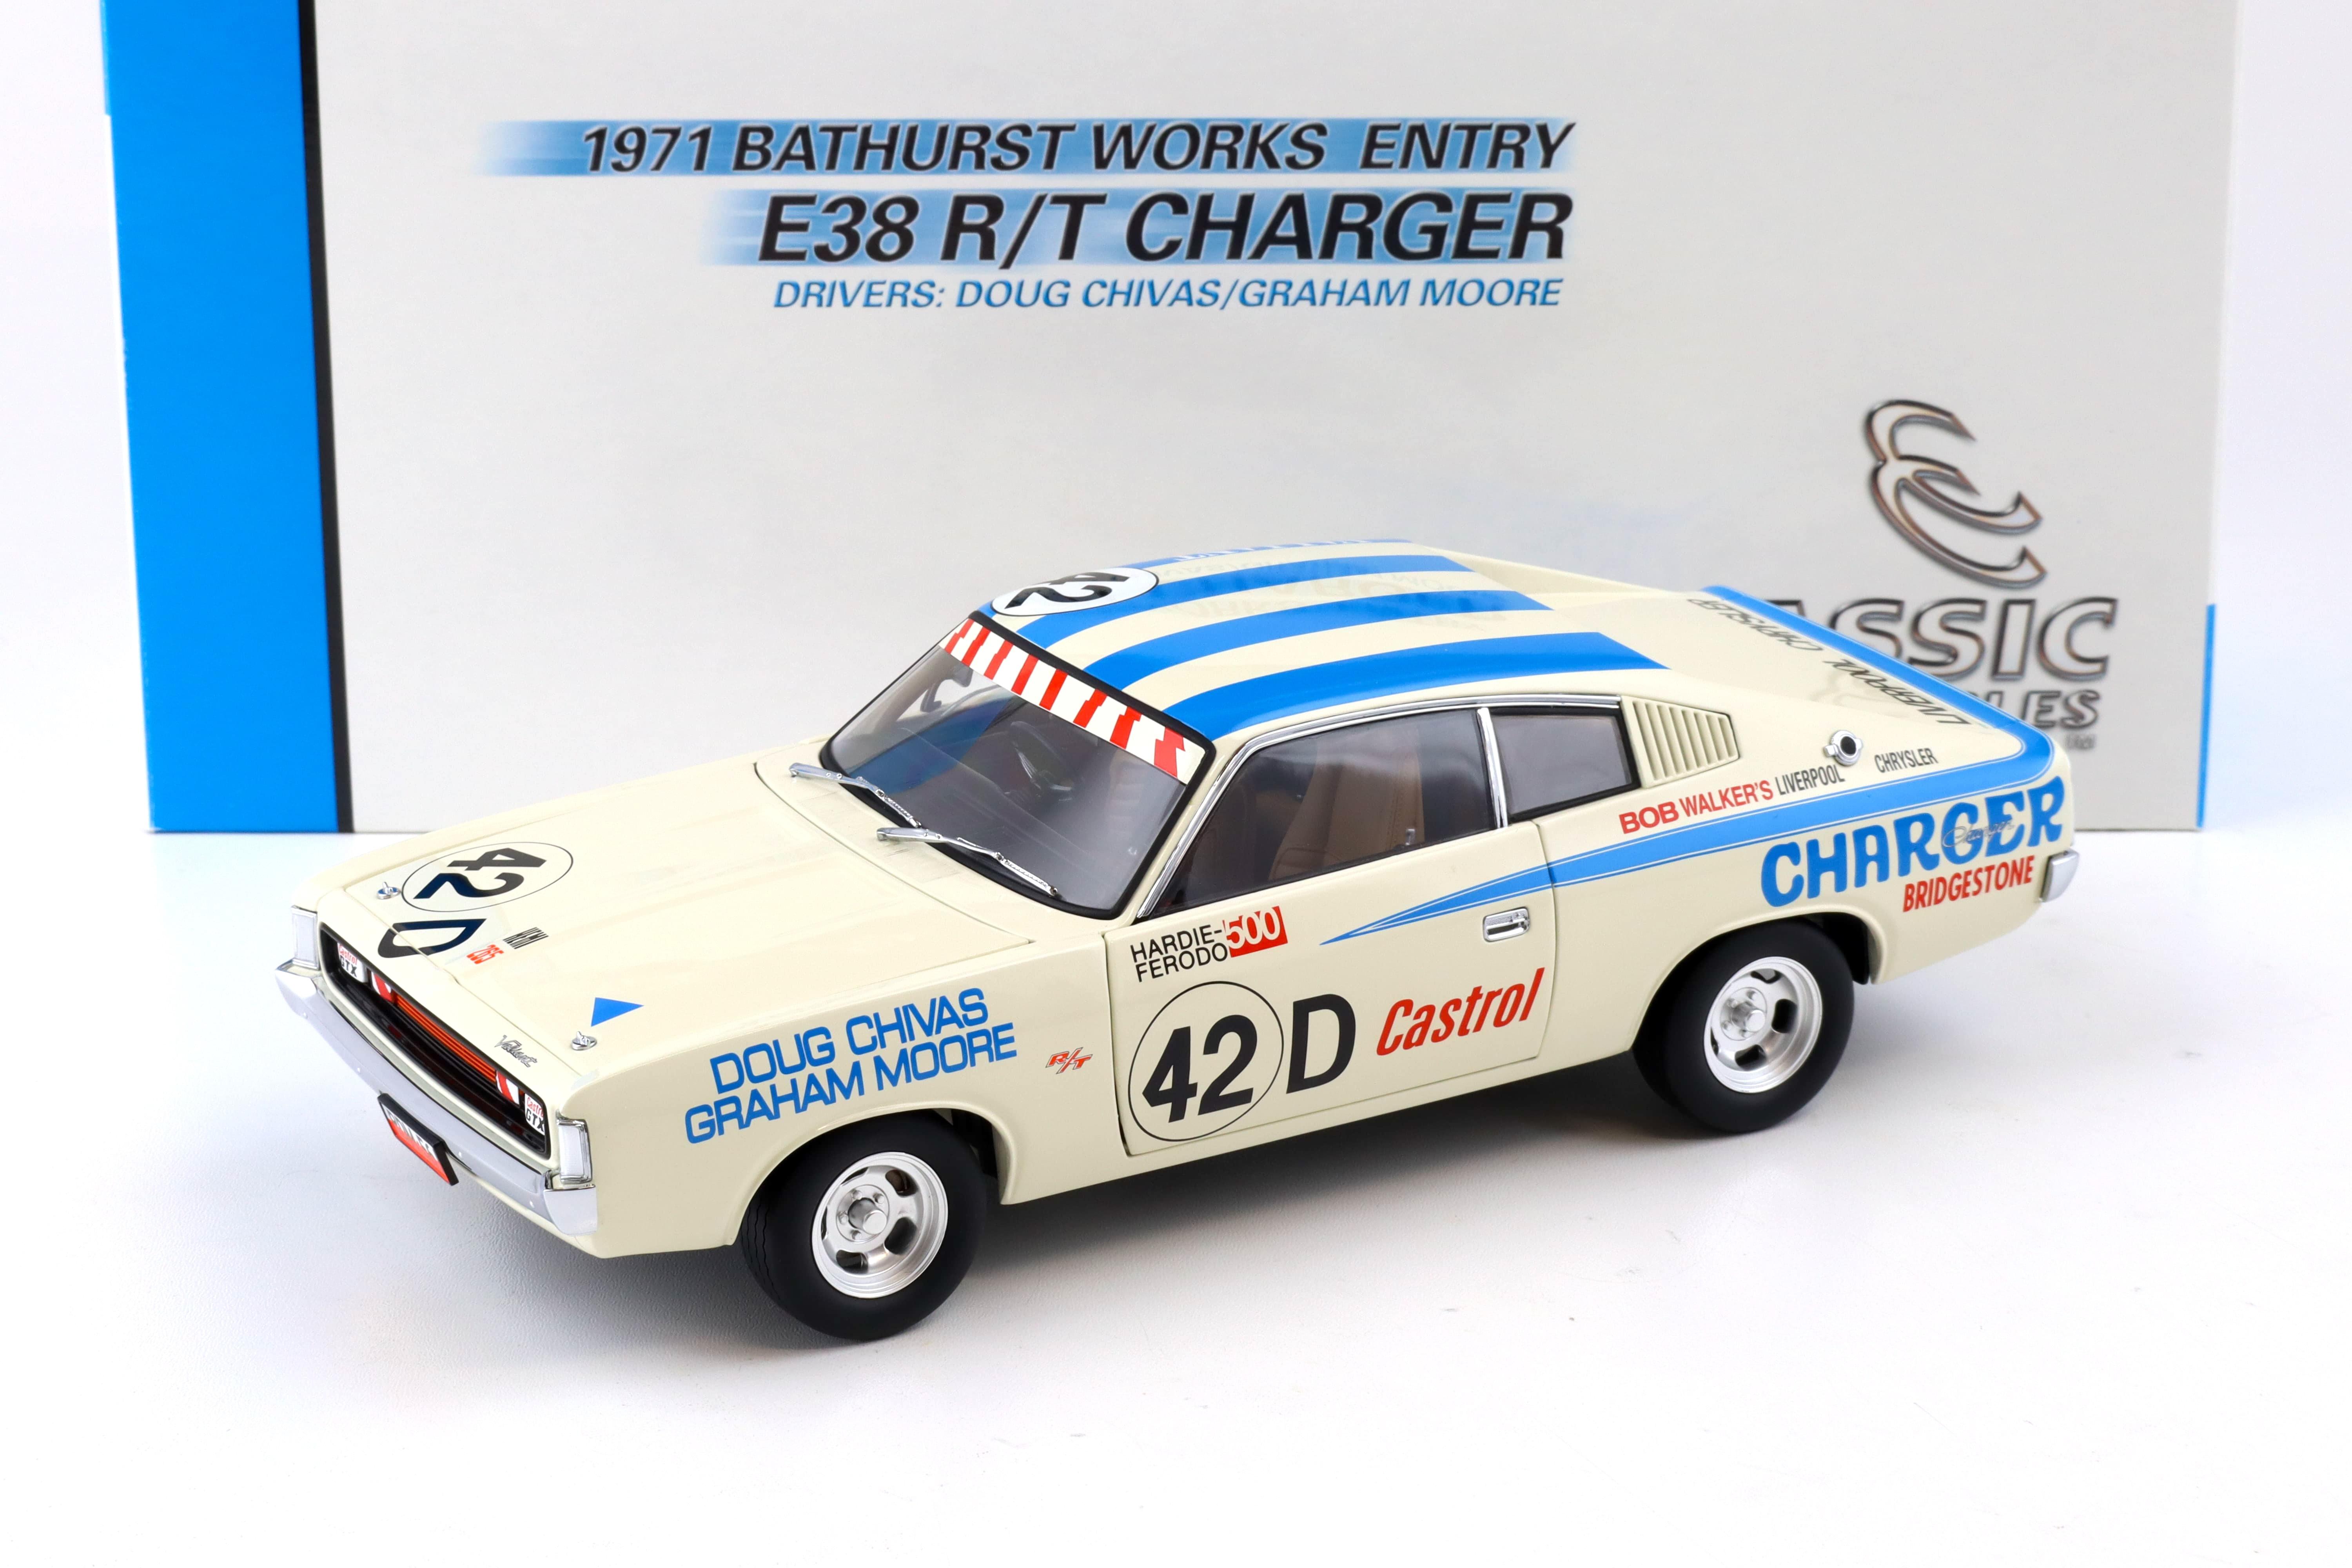 1:18 Classic Carlectables Chrysler E38 R/T Charger 1971 Bathurst Works Entry Chivas/ Moore #42